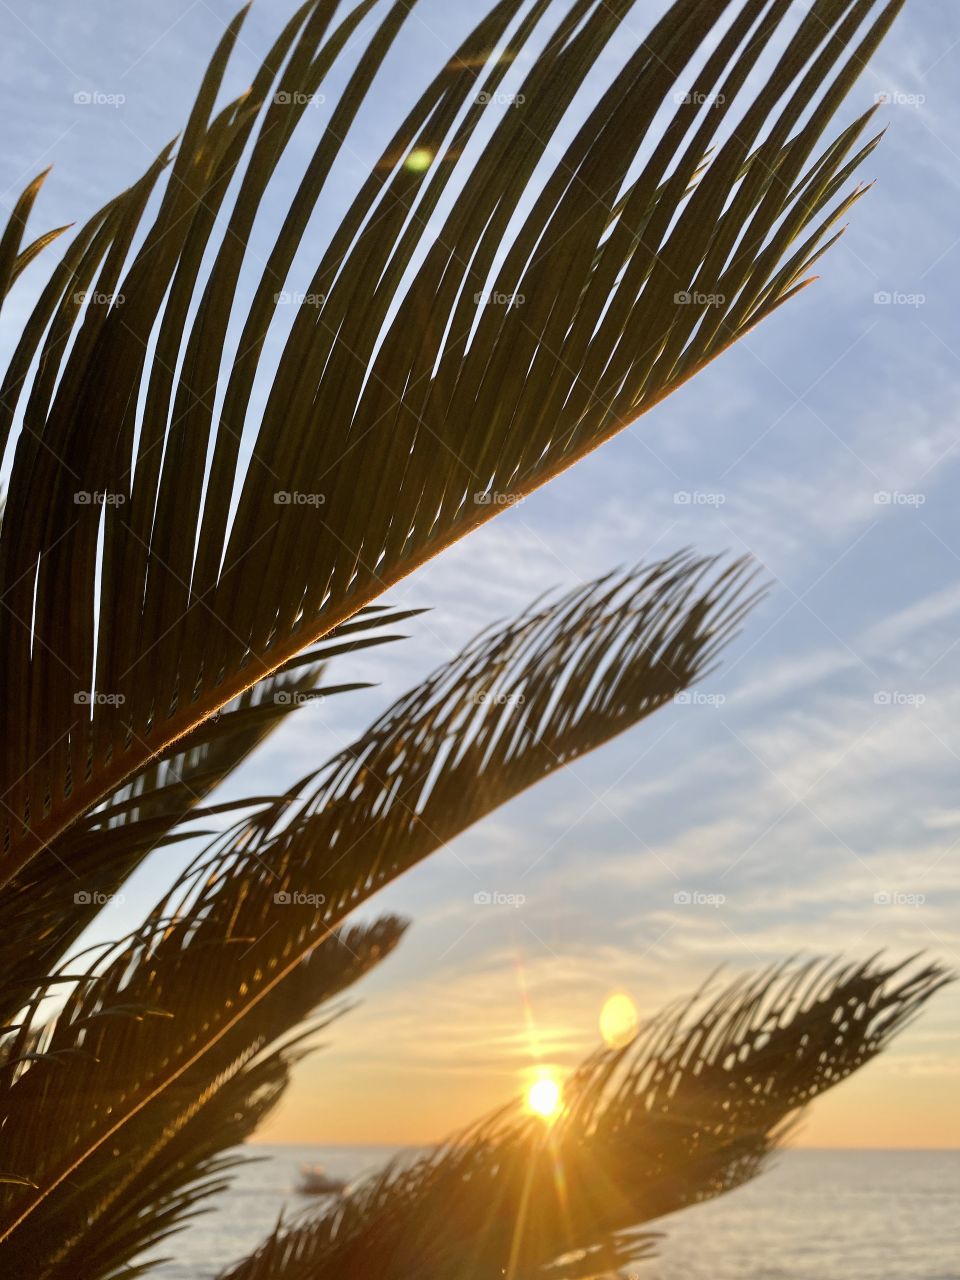 Sea ​​sunset and palm leaves in the foreground